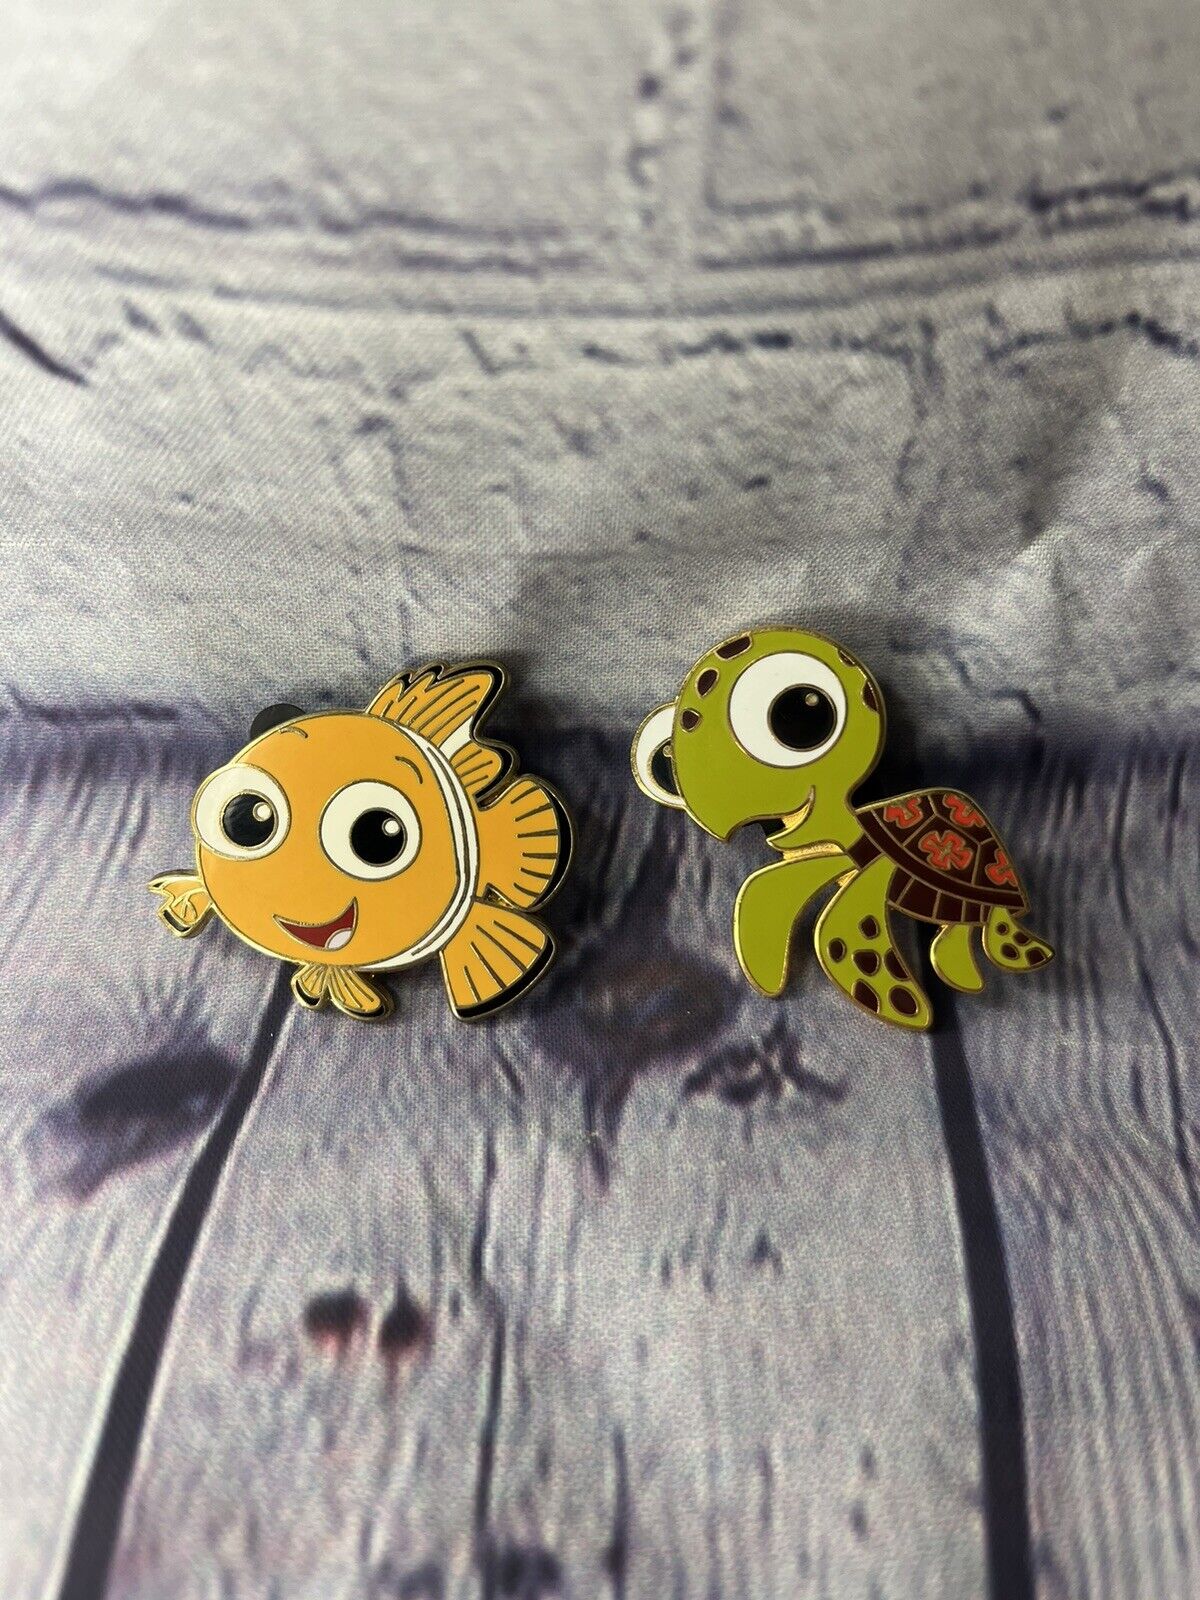 Set Of 2 Disney Pins: Squirt and Nemo from Finding Nemo